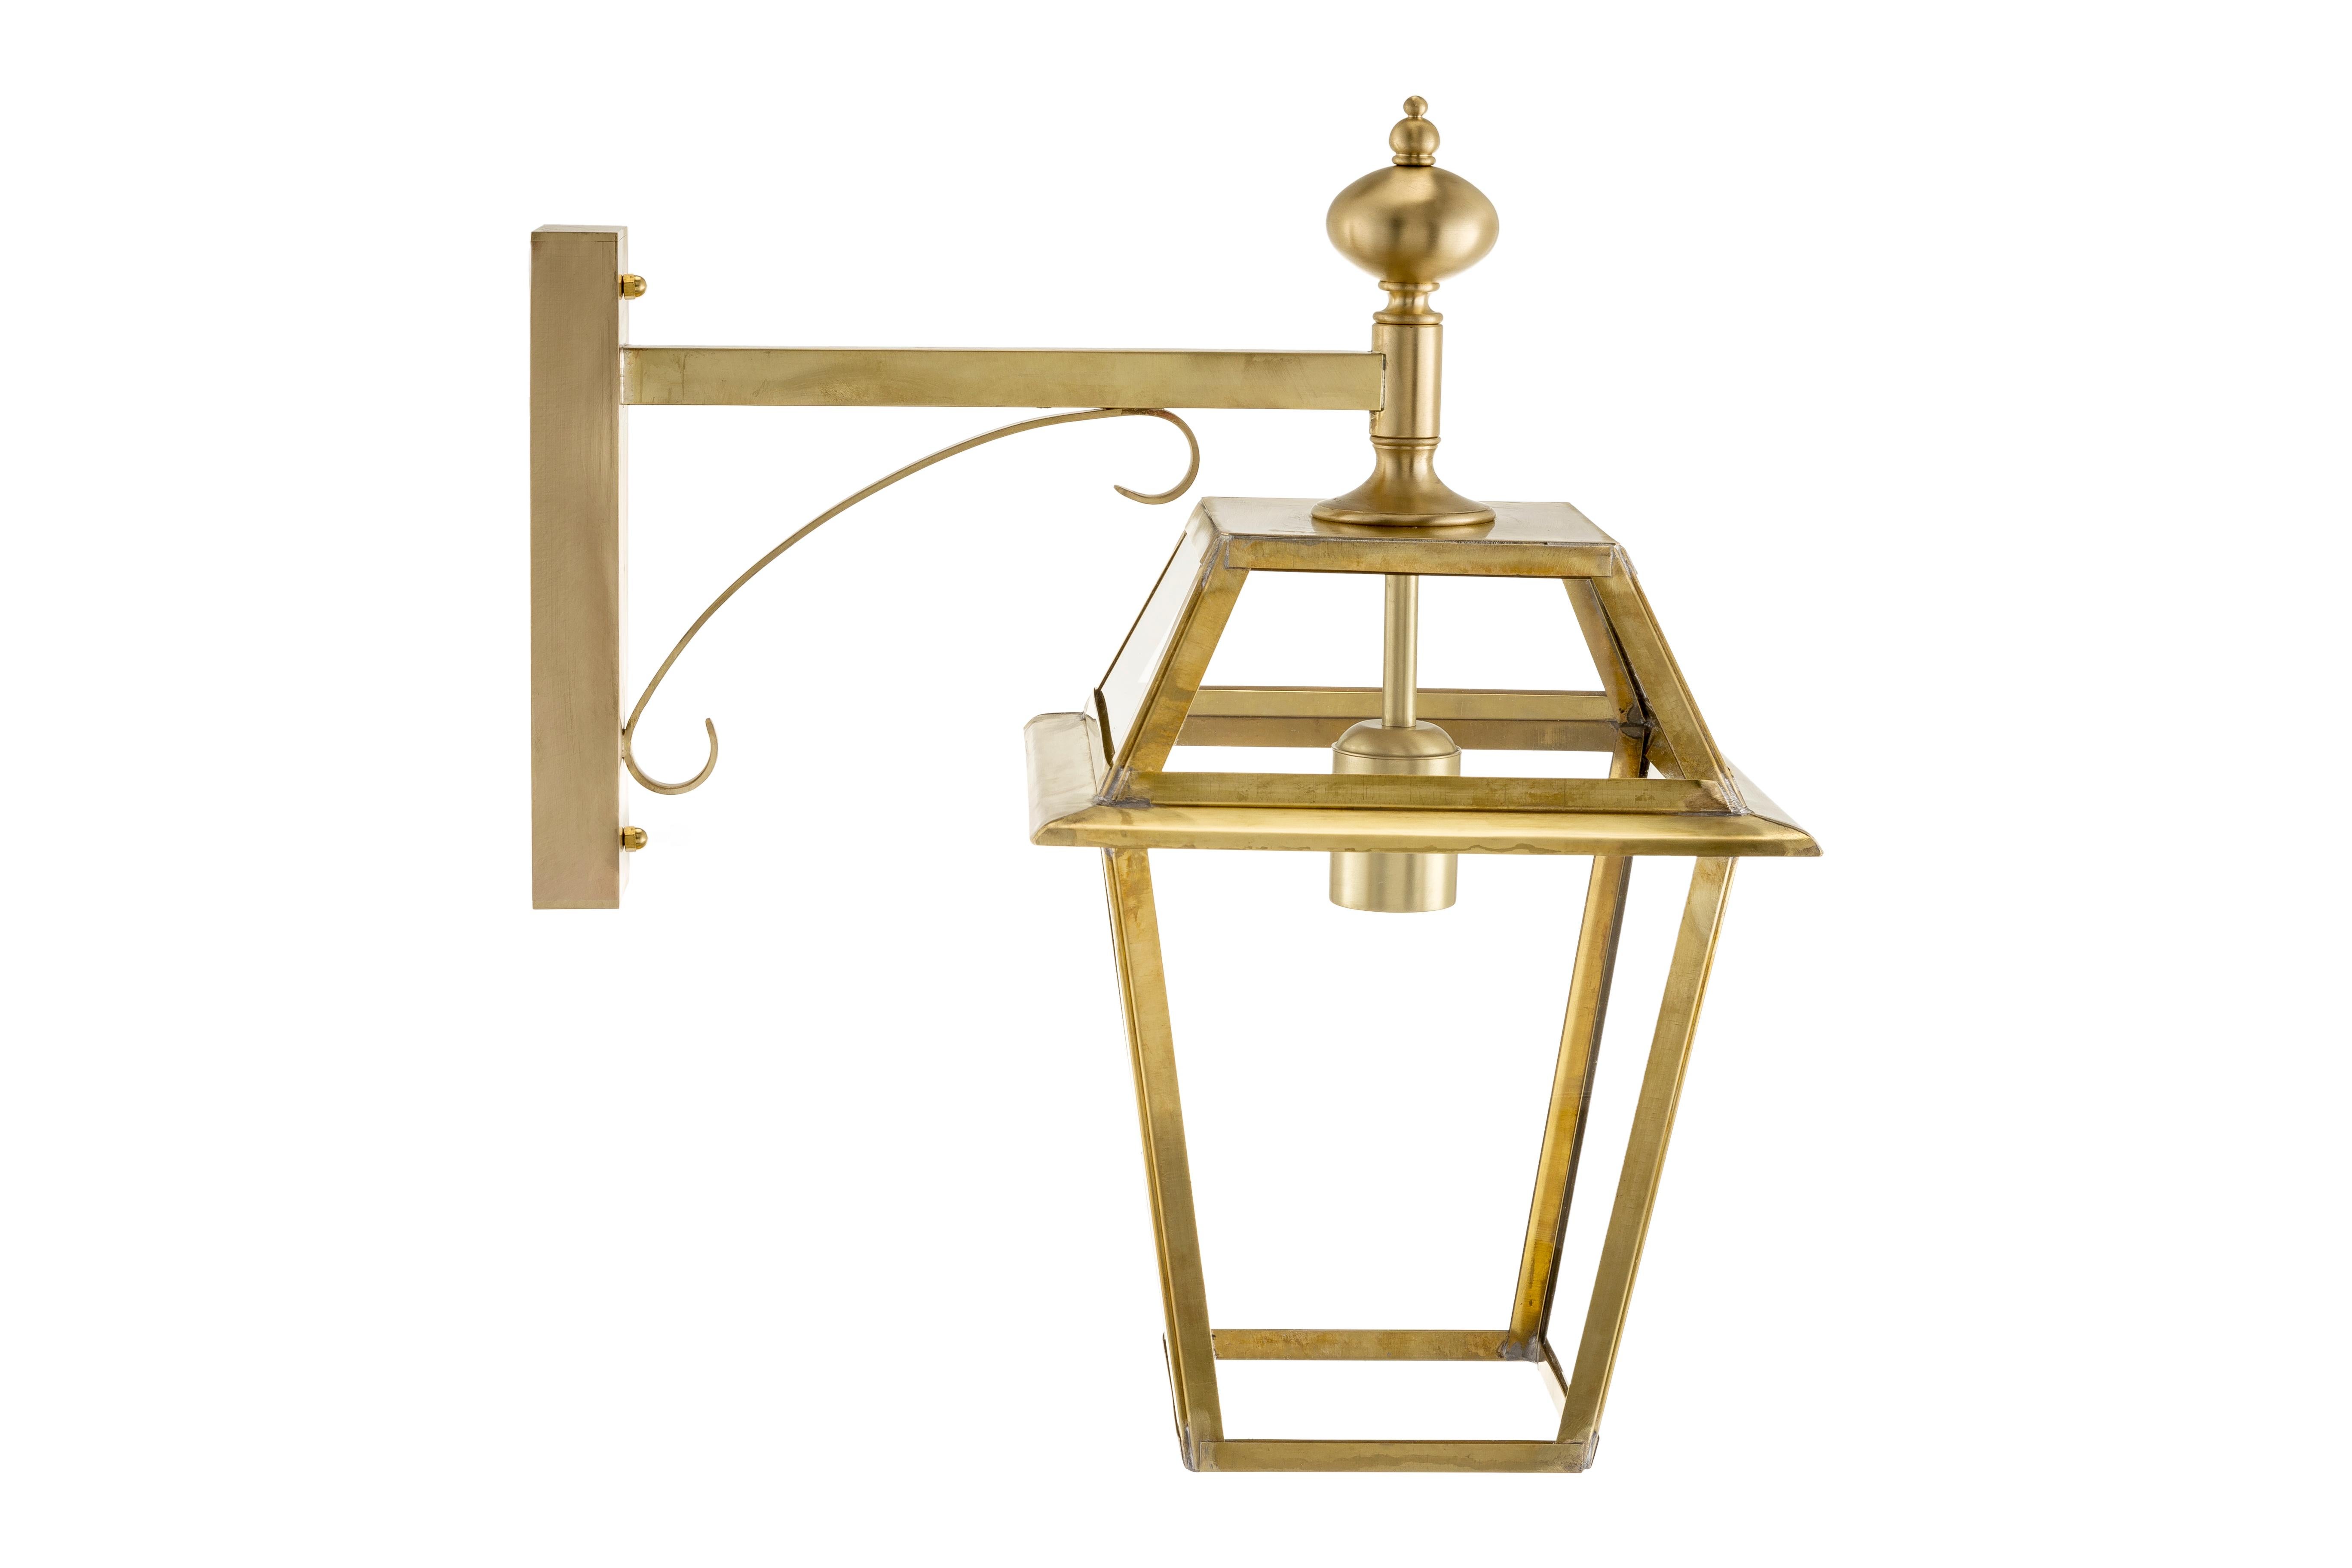 Novecento 333 natural brass applique with transparent glasses. It pertains to the Timeless collection in which classical objects, lamps and furniture coexist together with pieces reinterpreted in more contemporary shape. This lantern model is called